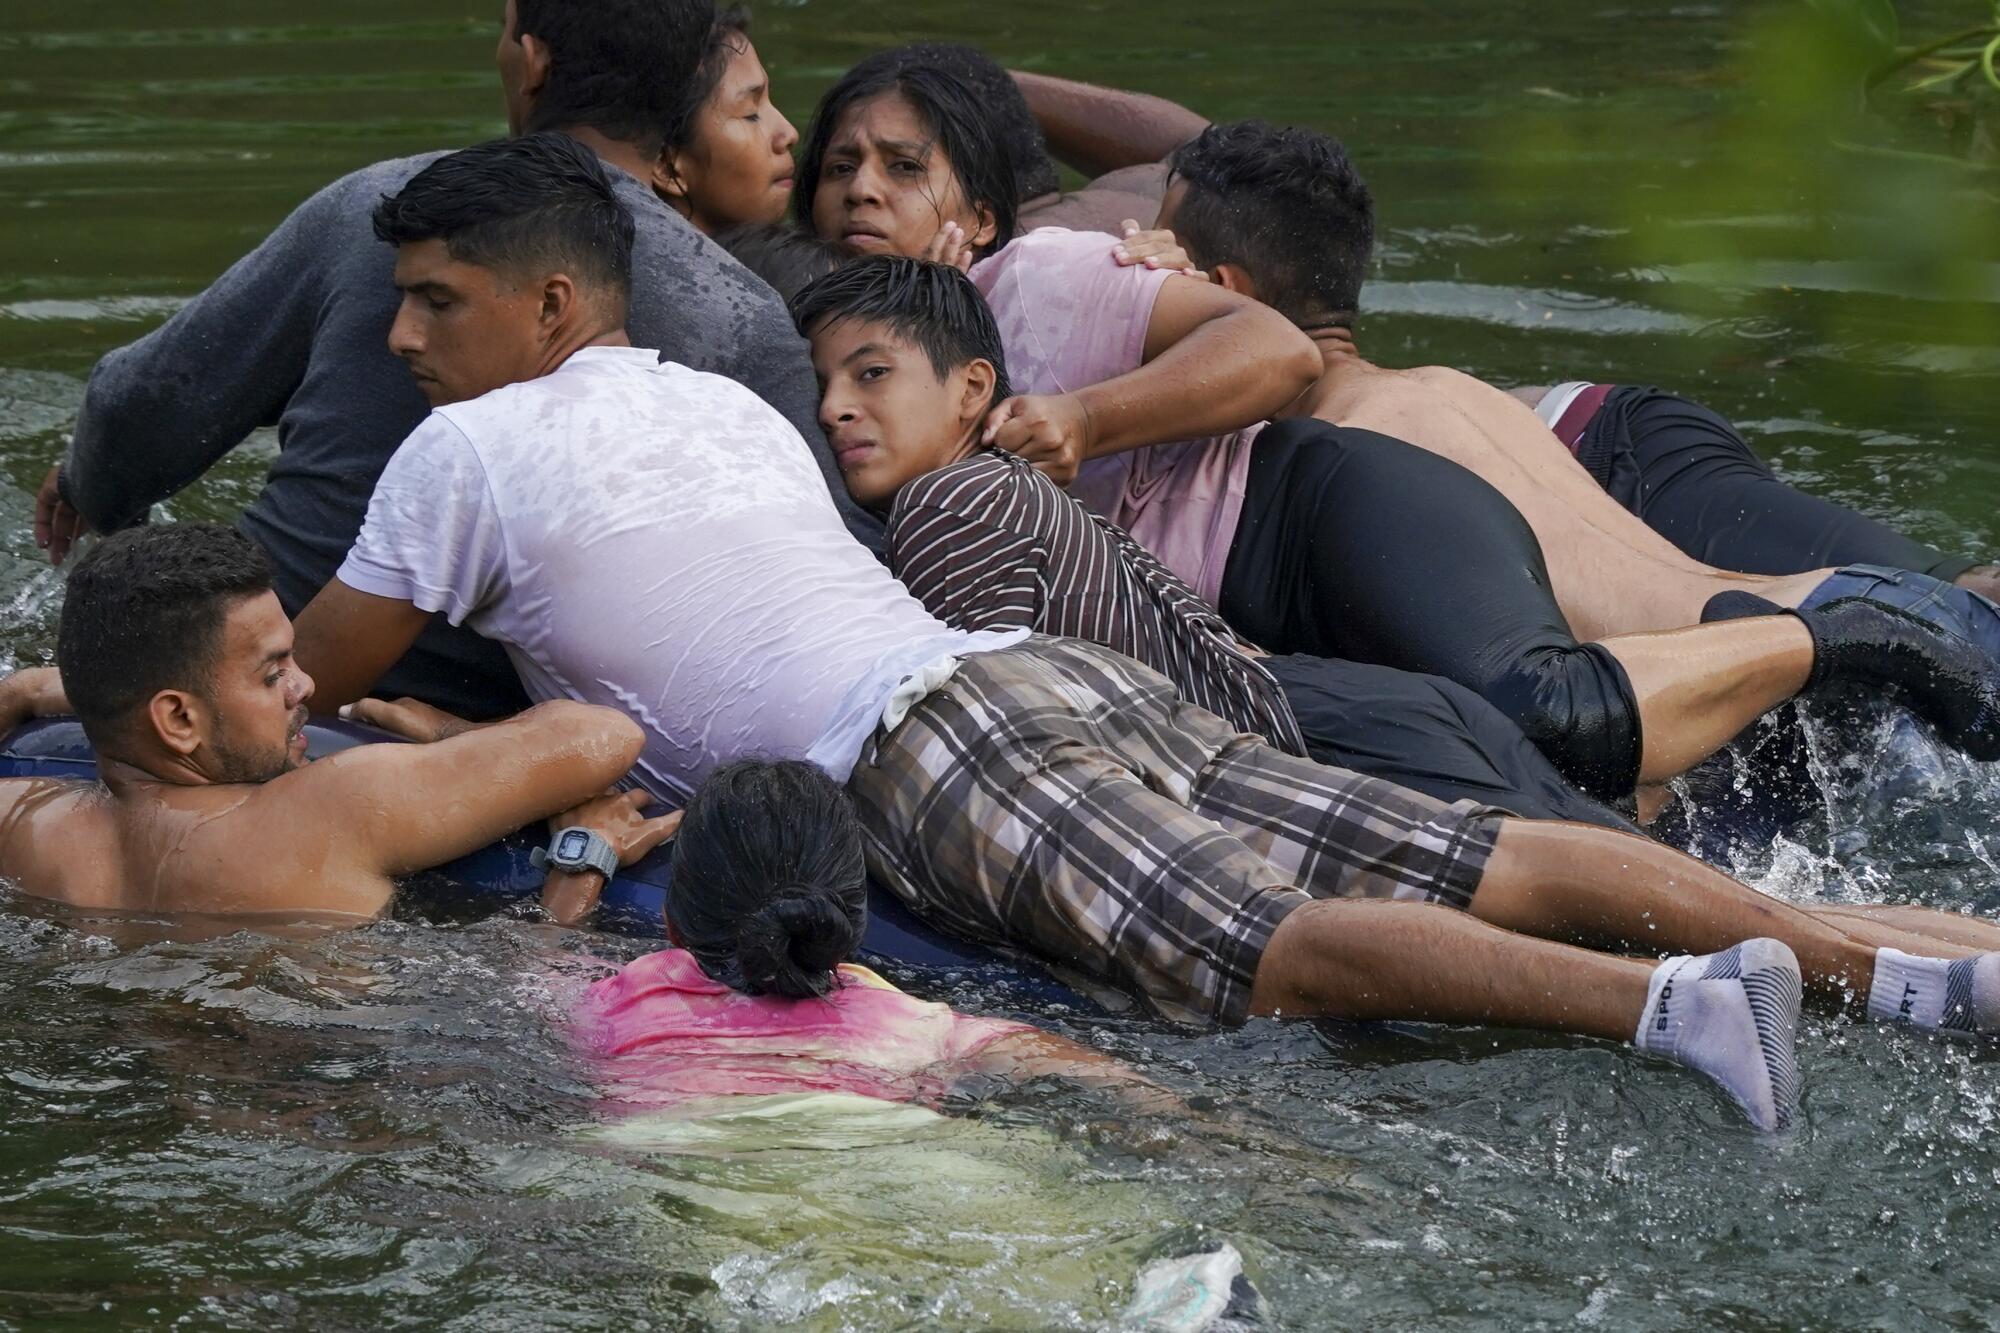 Migrants cross the Rio Grande on an inflatable mattress into the United States from Matamoros, Mexico.